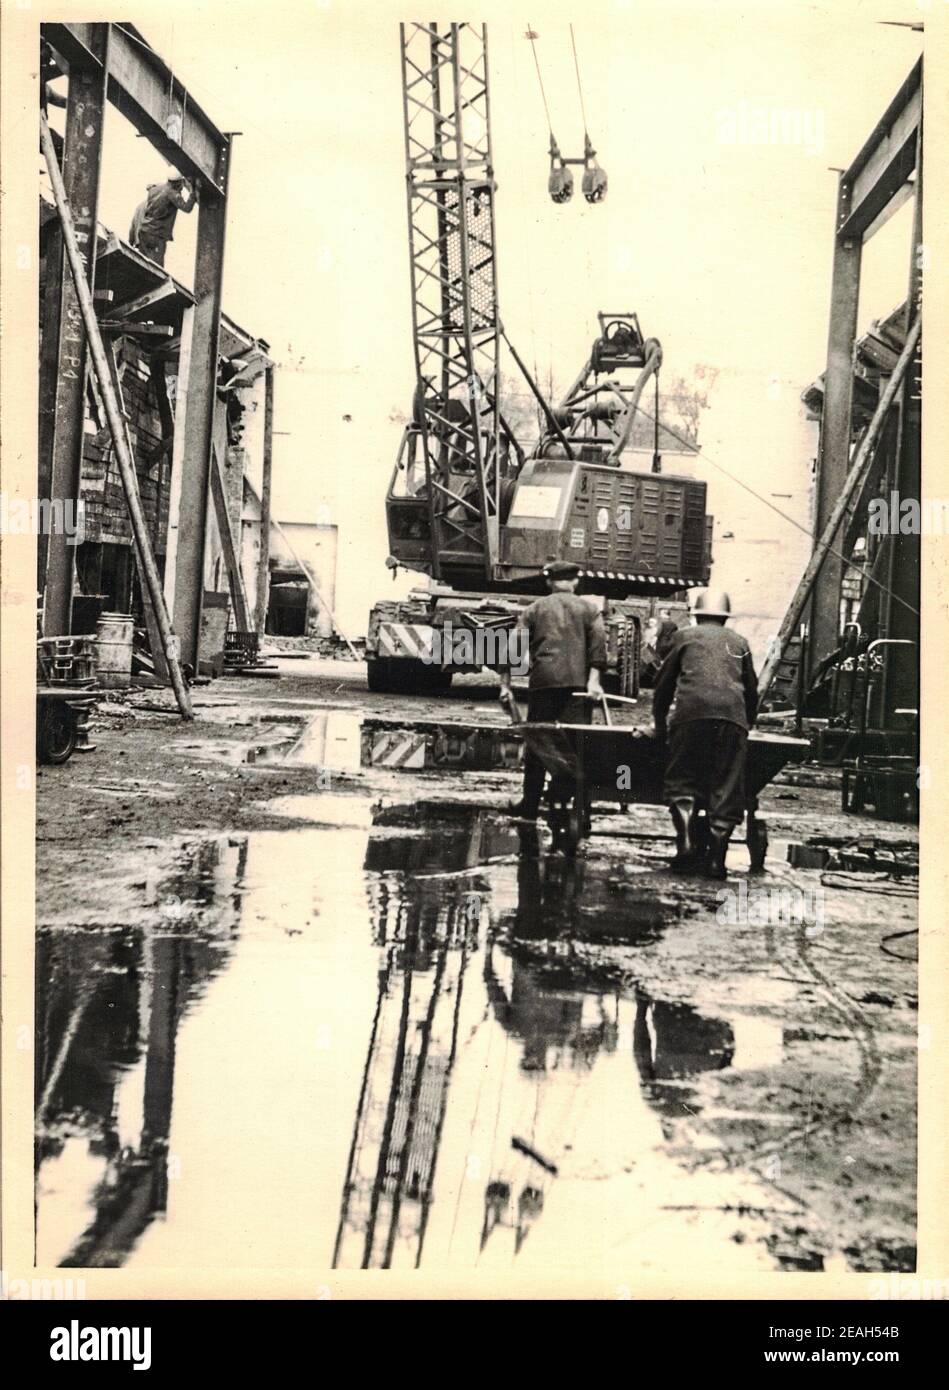 FRAUREUTH, EAST GERMANY - MAY 20, 1965: The retro photo shows construction site in Communist bloc. Historical mobile crane. Former East Germany, 1960s Stock Photo